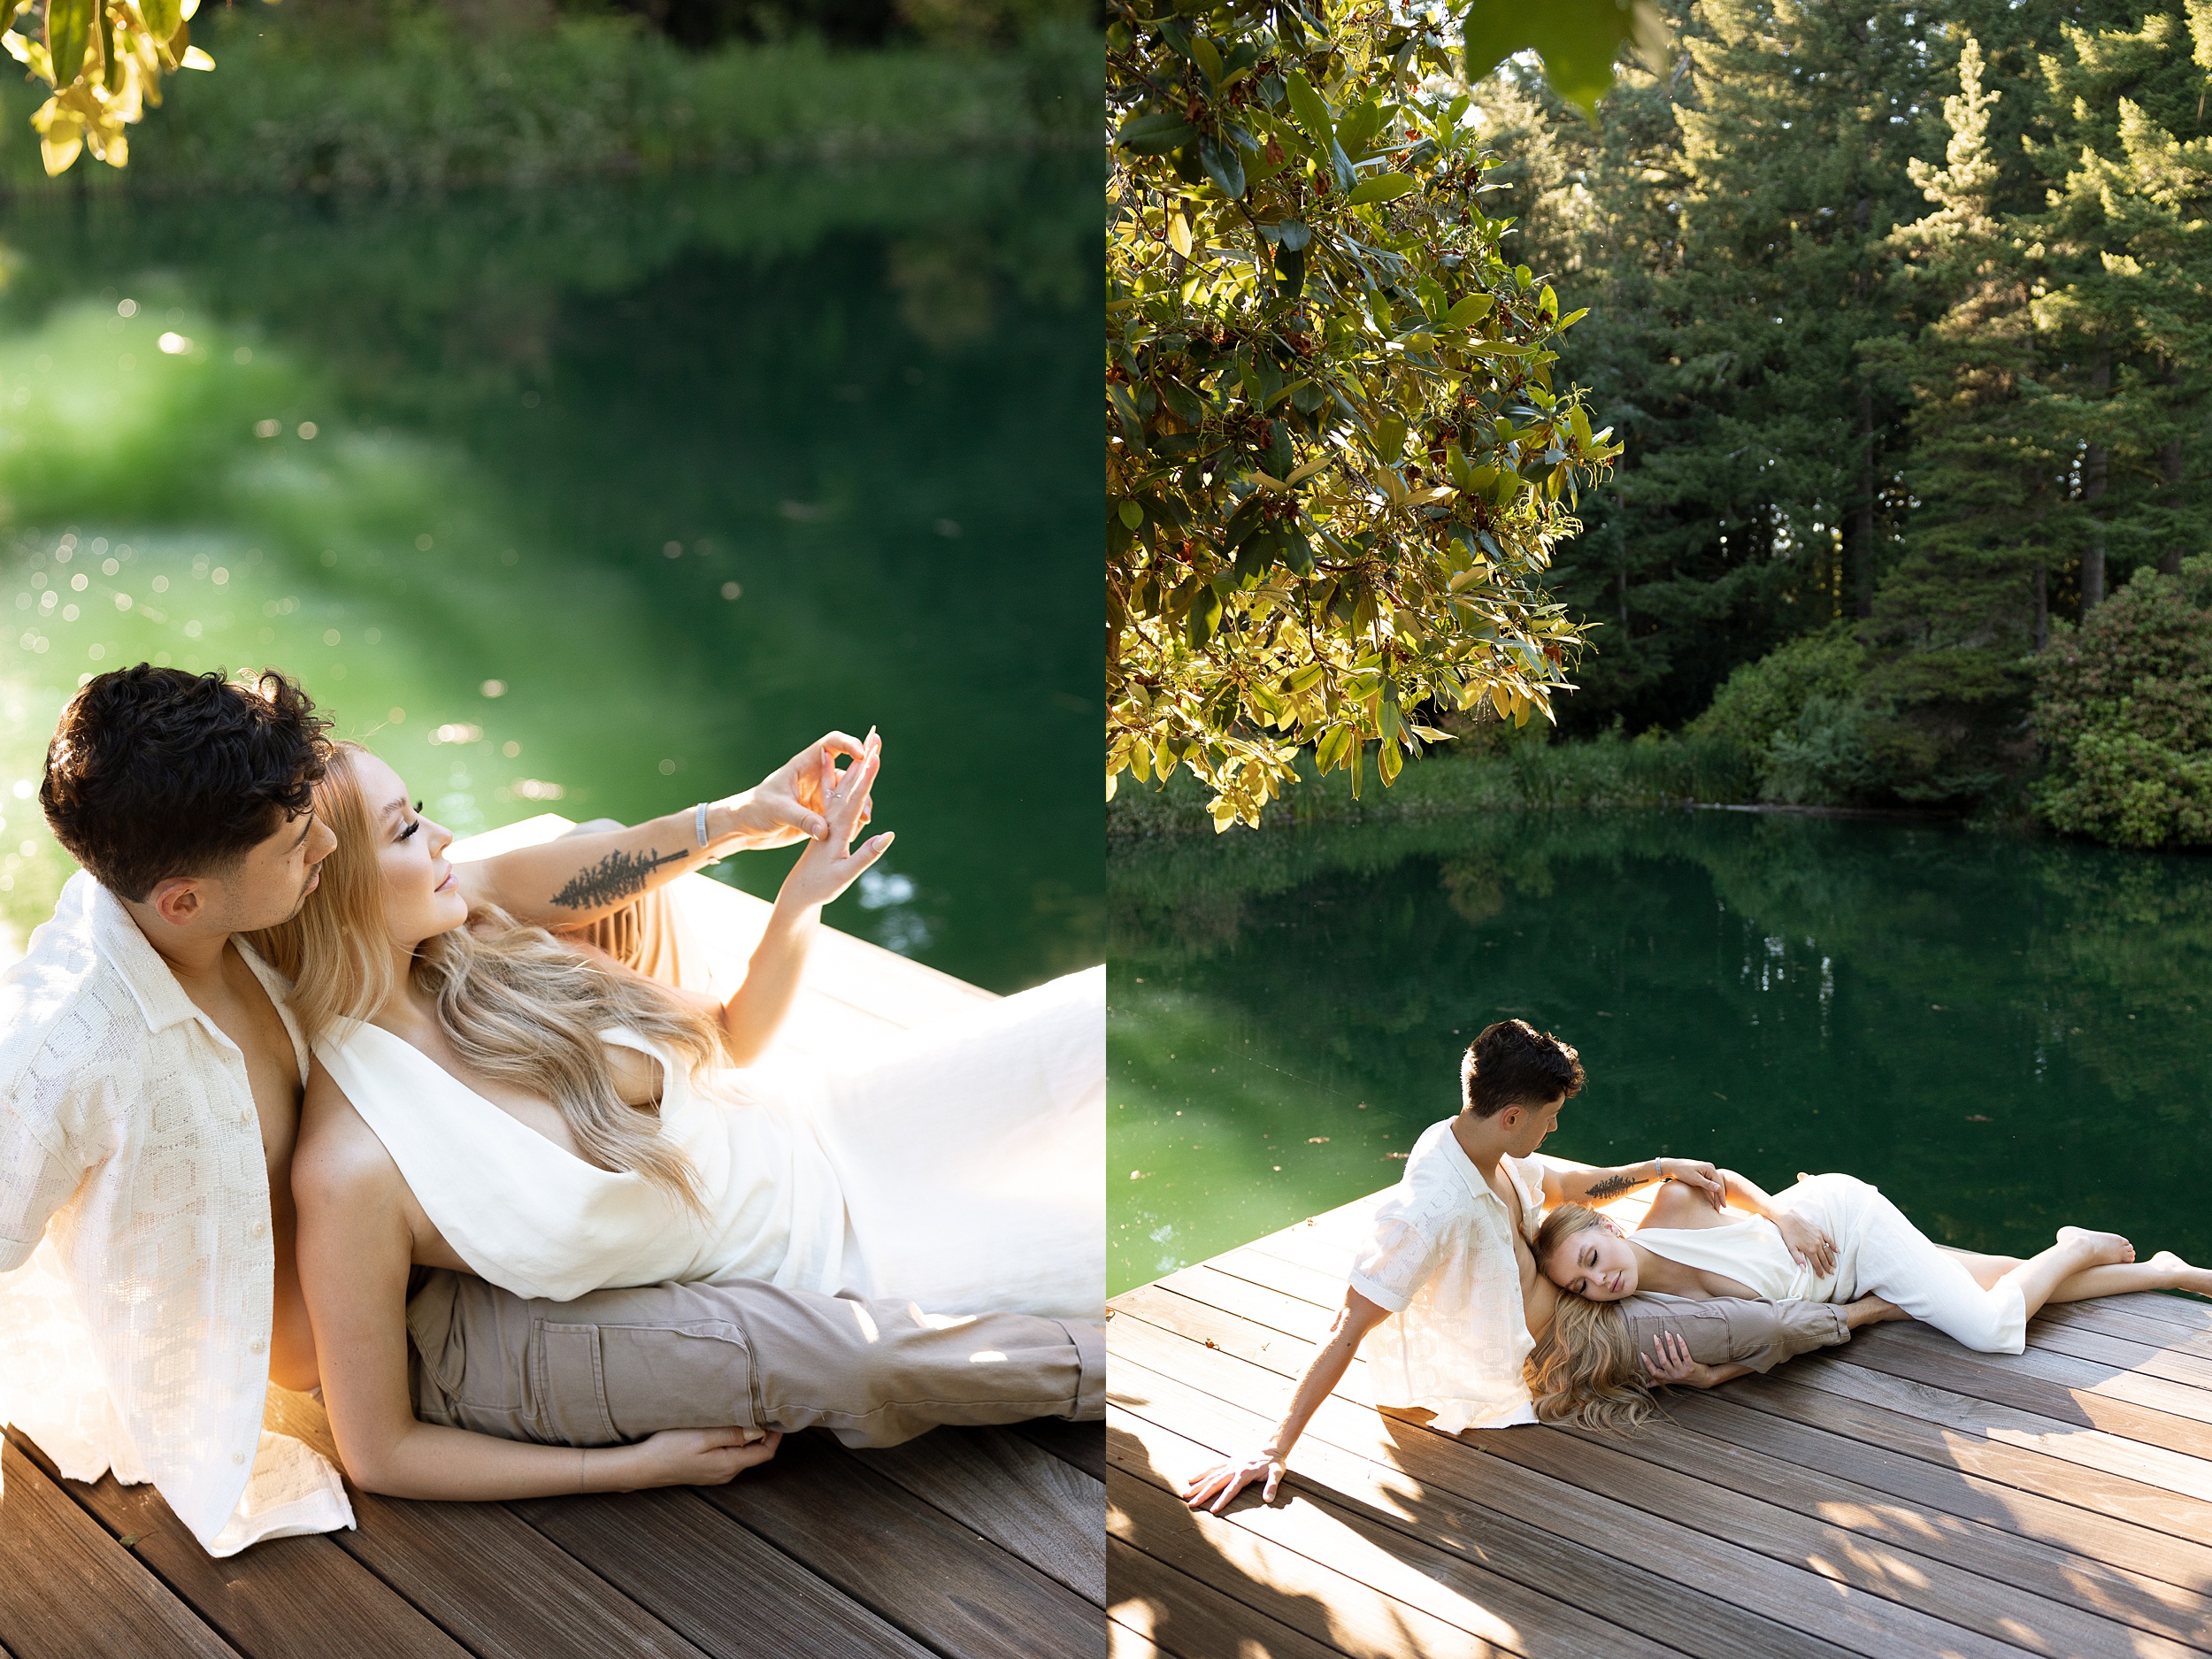 lake engagement photos with scenic greenery trees and a man and woman laying on a dock